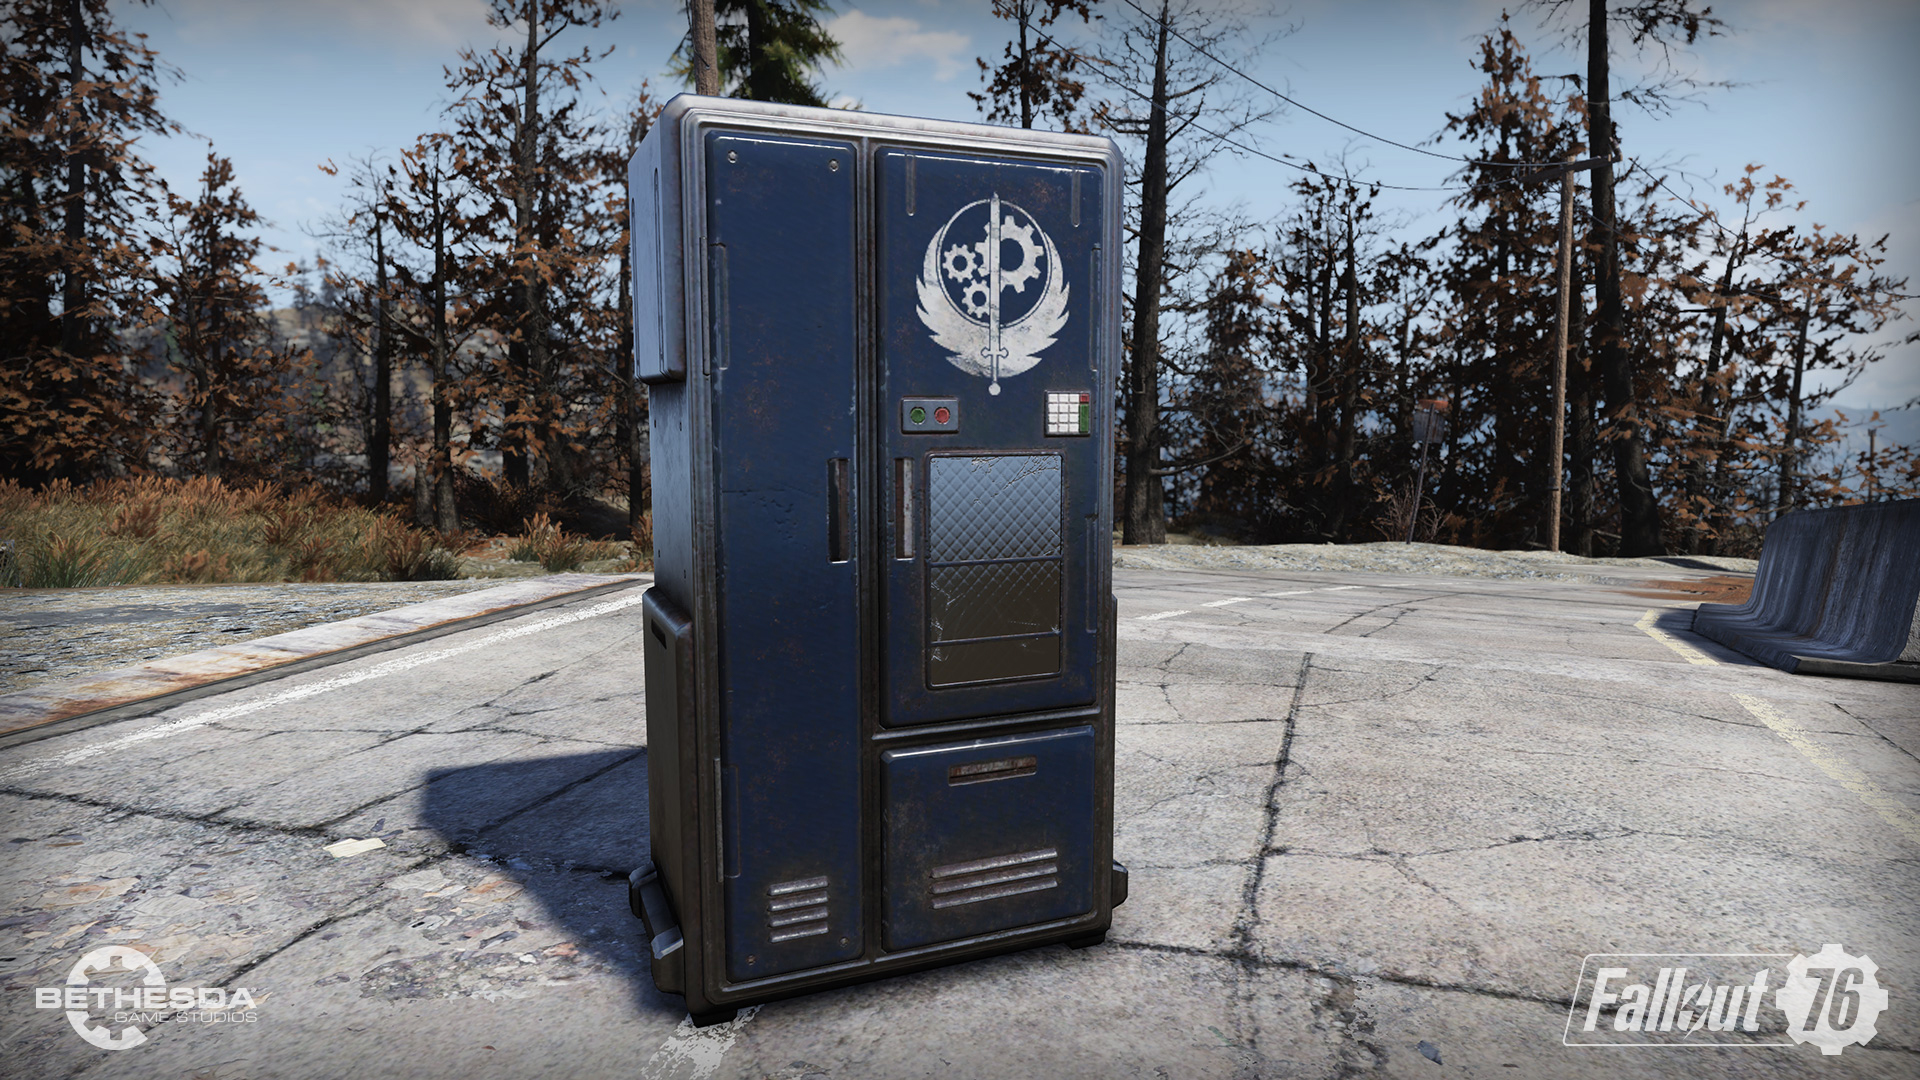 FALLOUT 76: INSIDE THE VAULT NEW STEEL DAWN TRAILER COMMUNITY